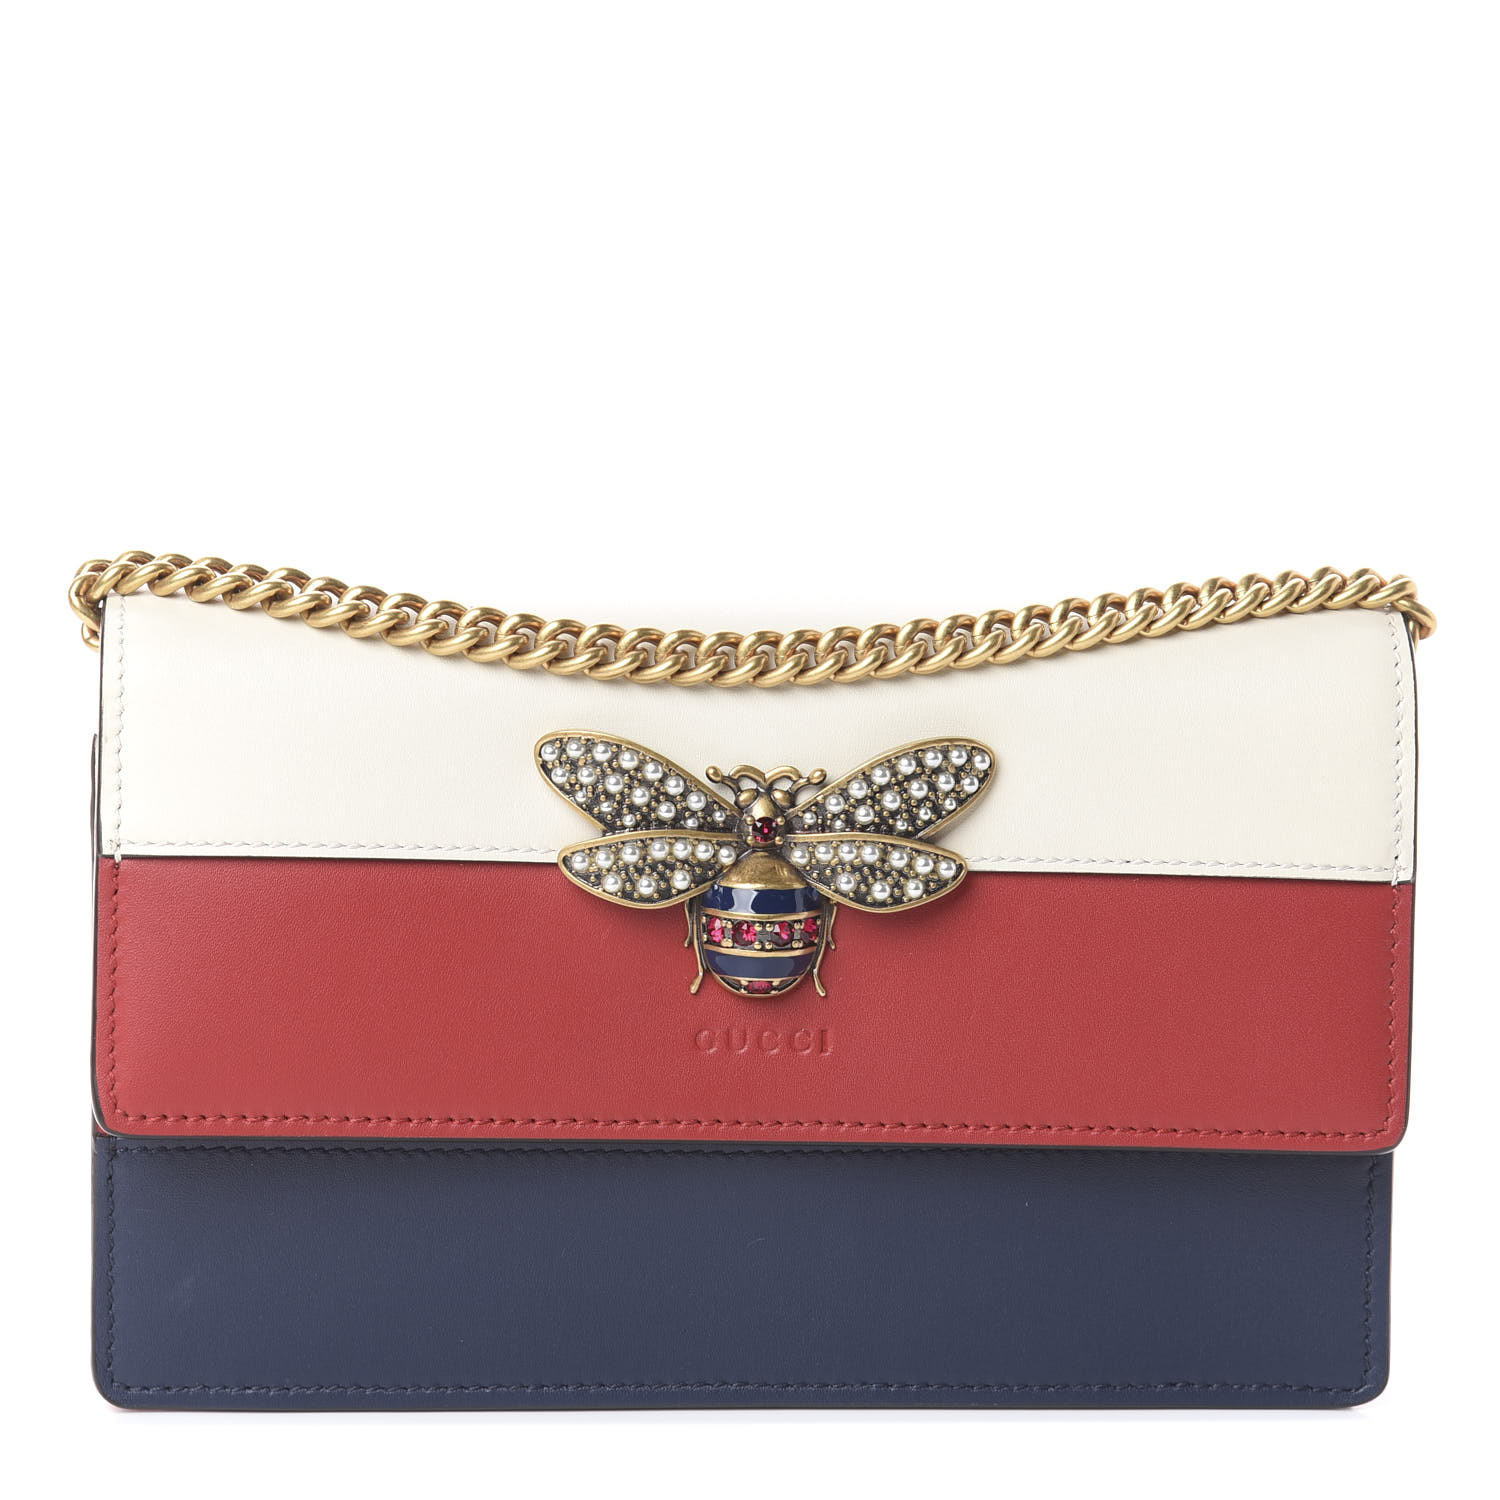 gucci red white and blue bag